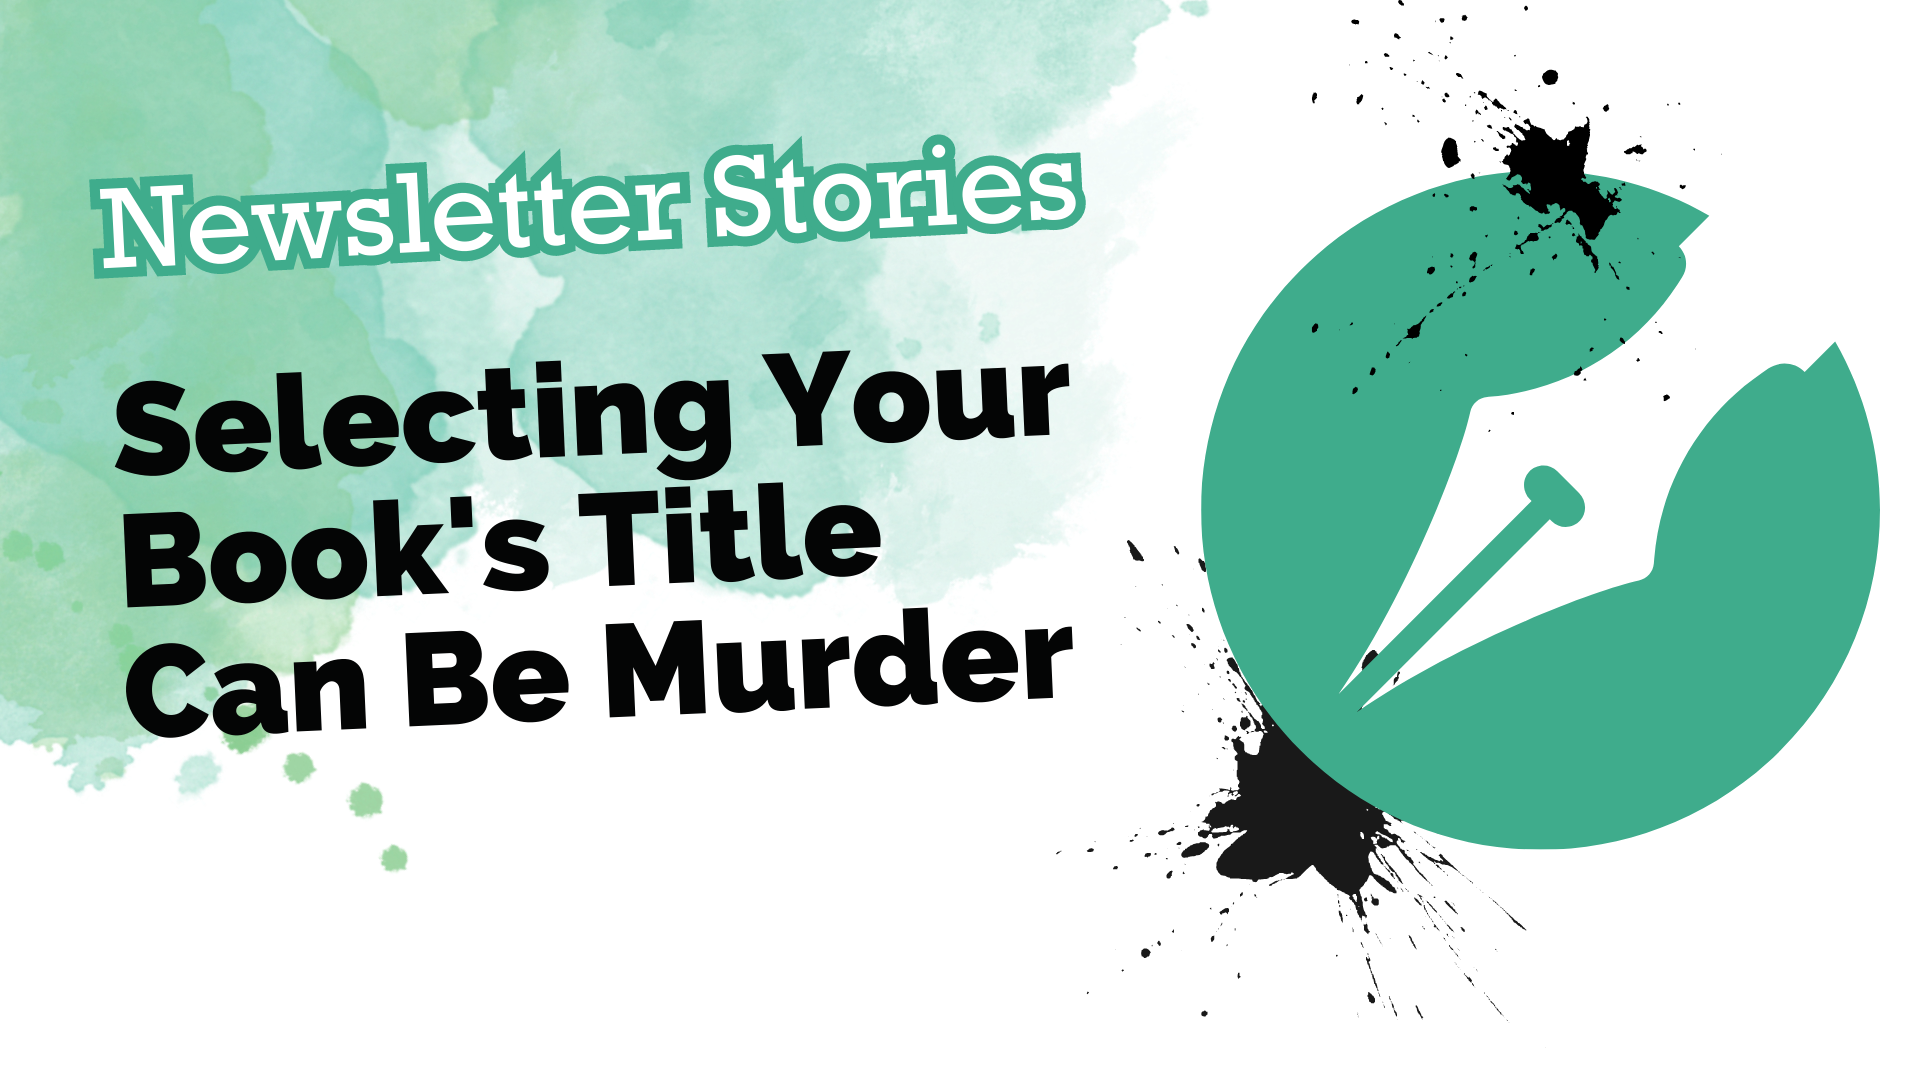 Selecting Your Book's Title Can Be Murder